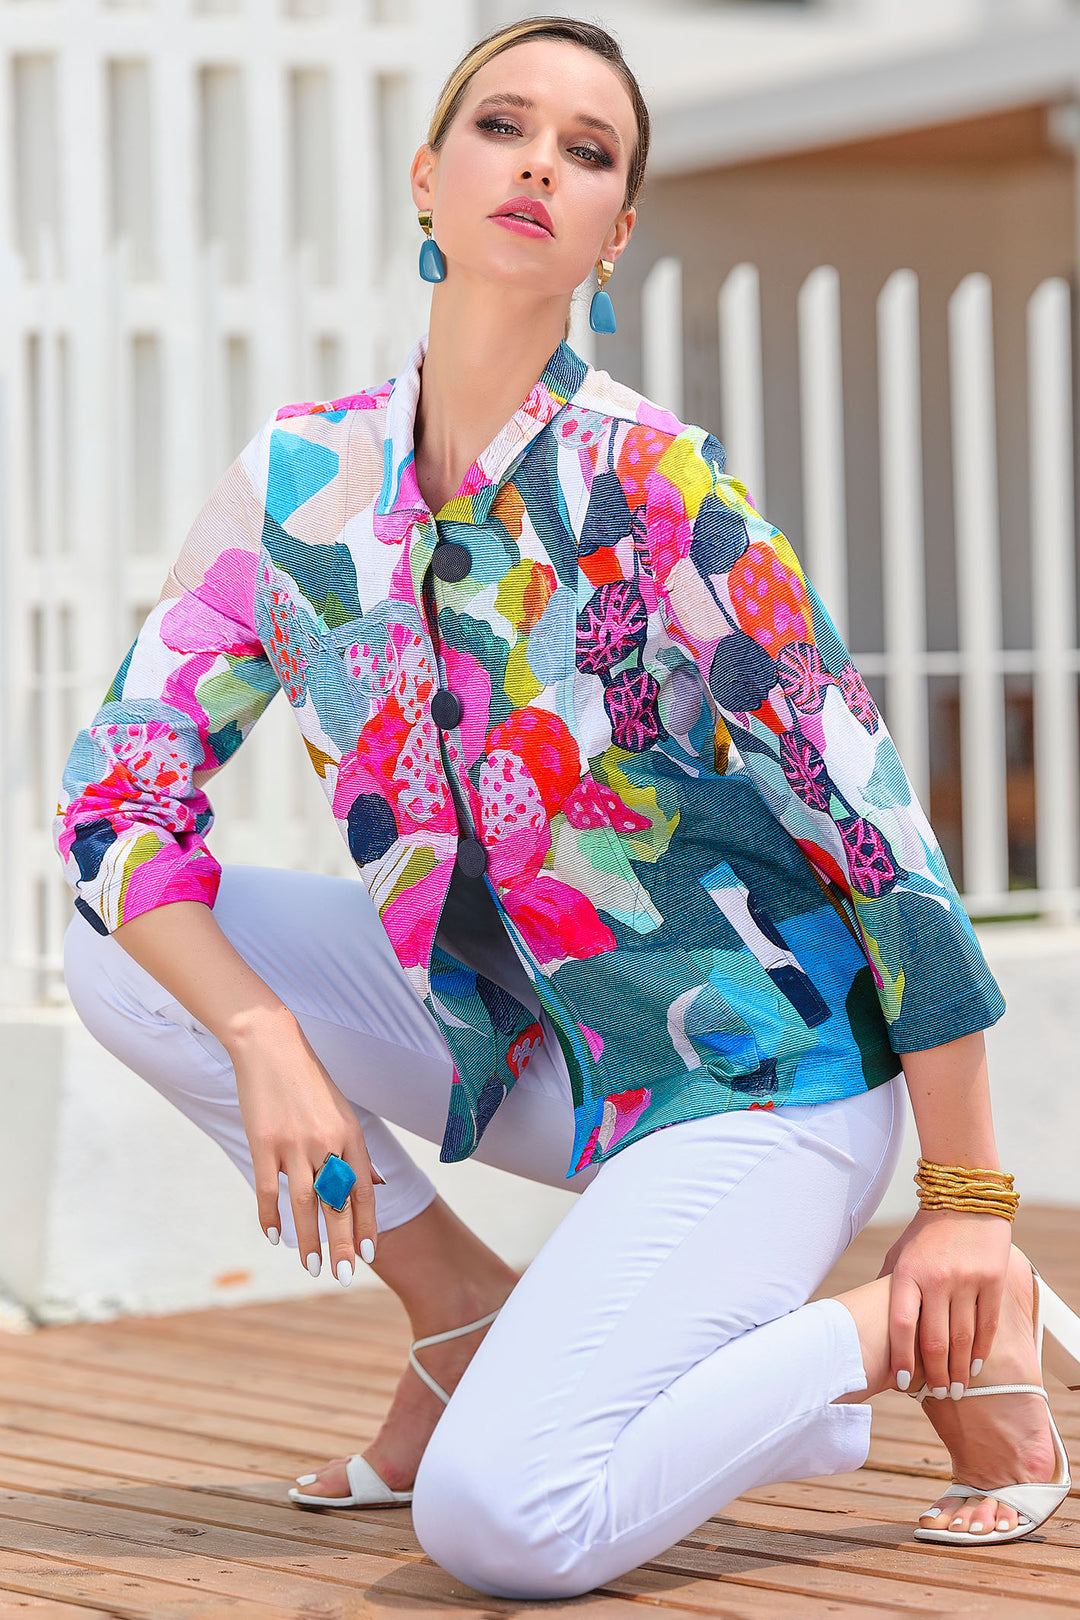 Dolcezza 24678 Pink Simply Art Irene Guerriero Rumba Print Jacket - Shirley Allum Boutique